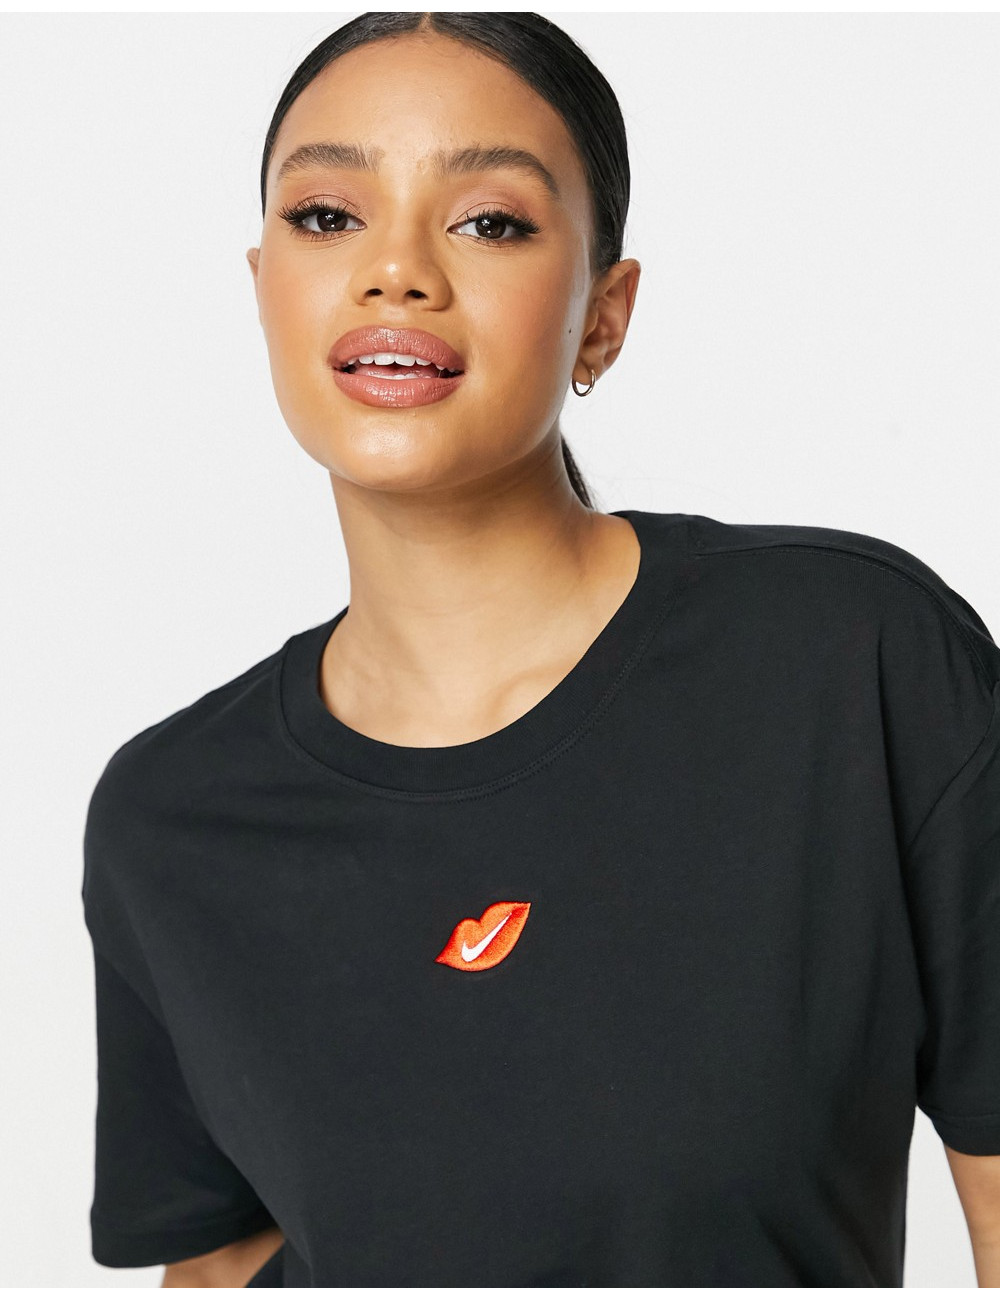 Nike t-shirt in black with...